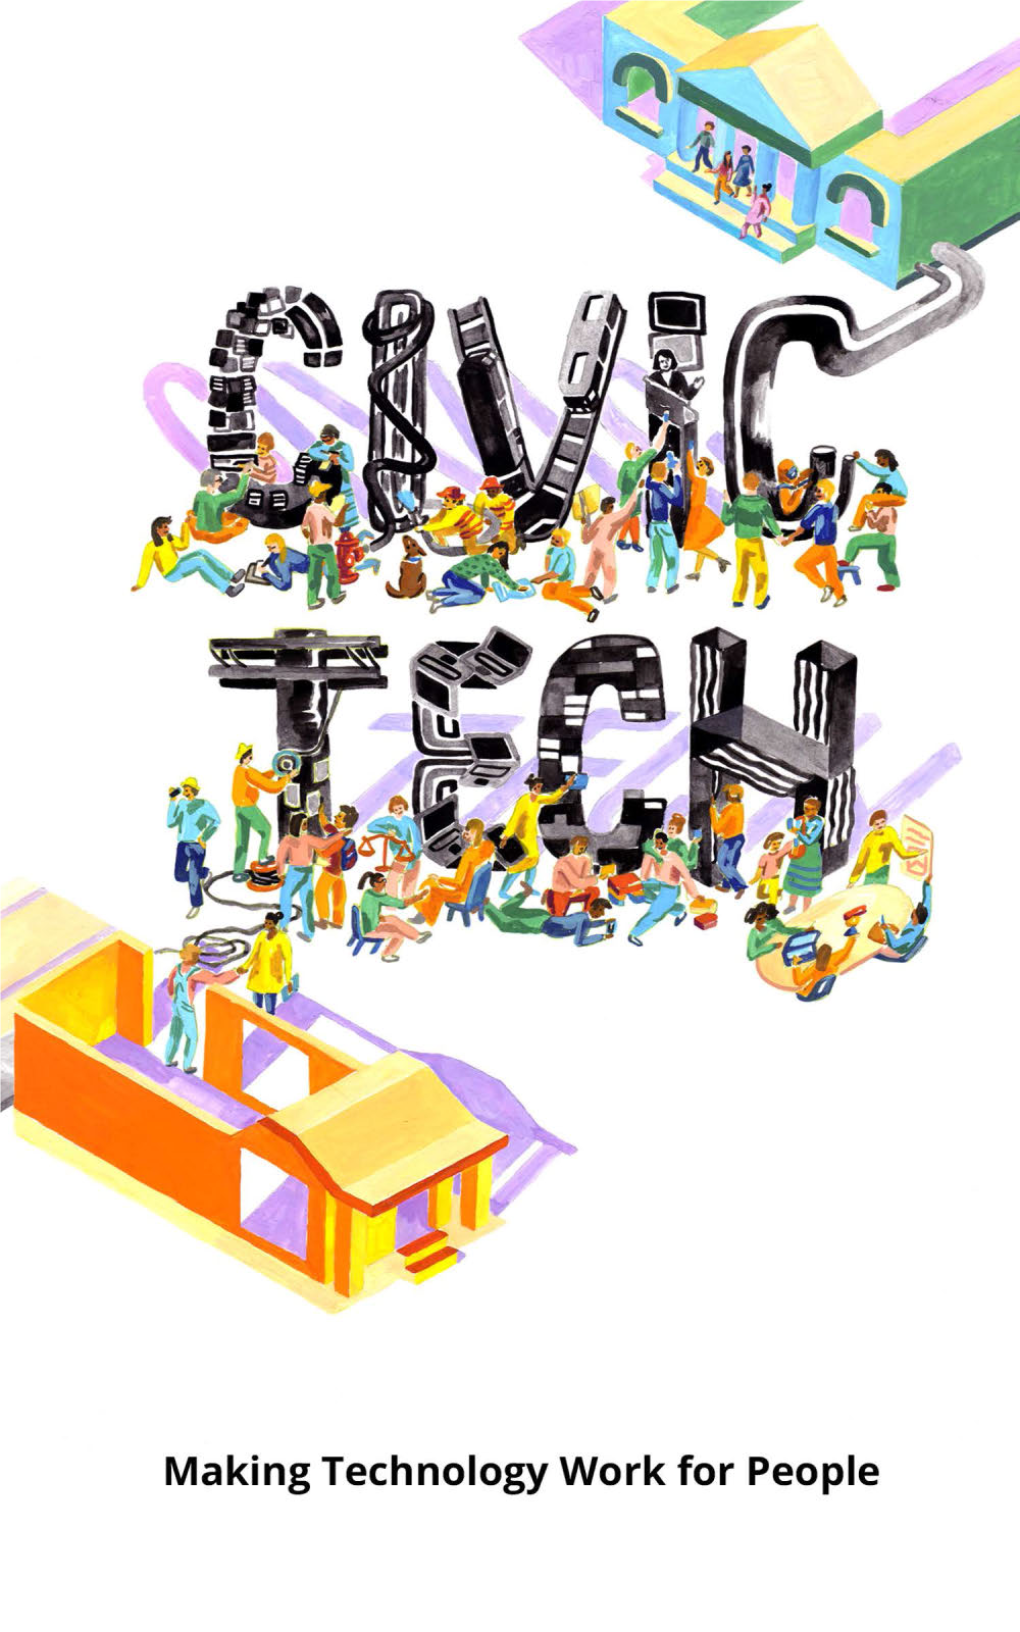 Civic Tech: Making Technology Work for People